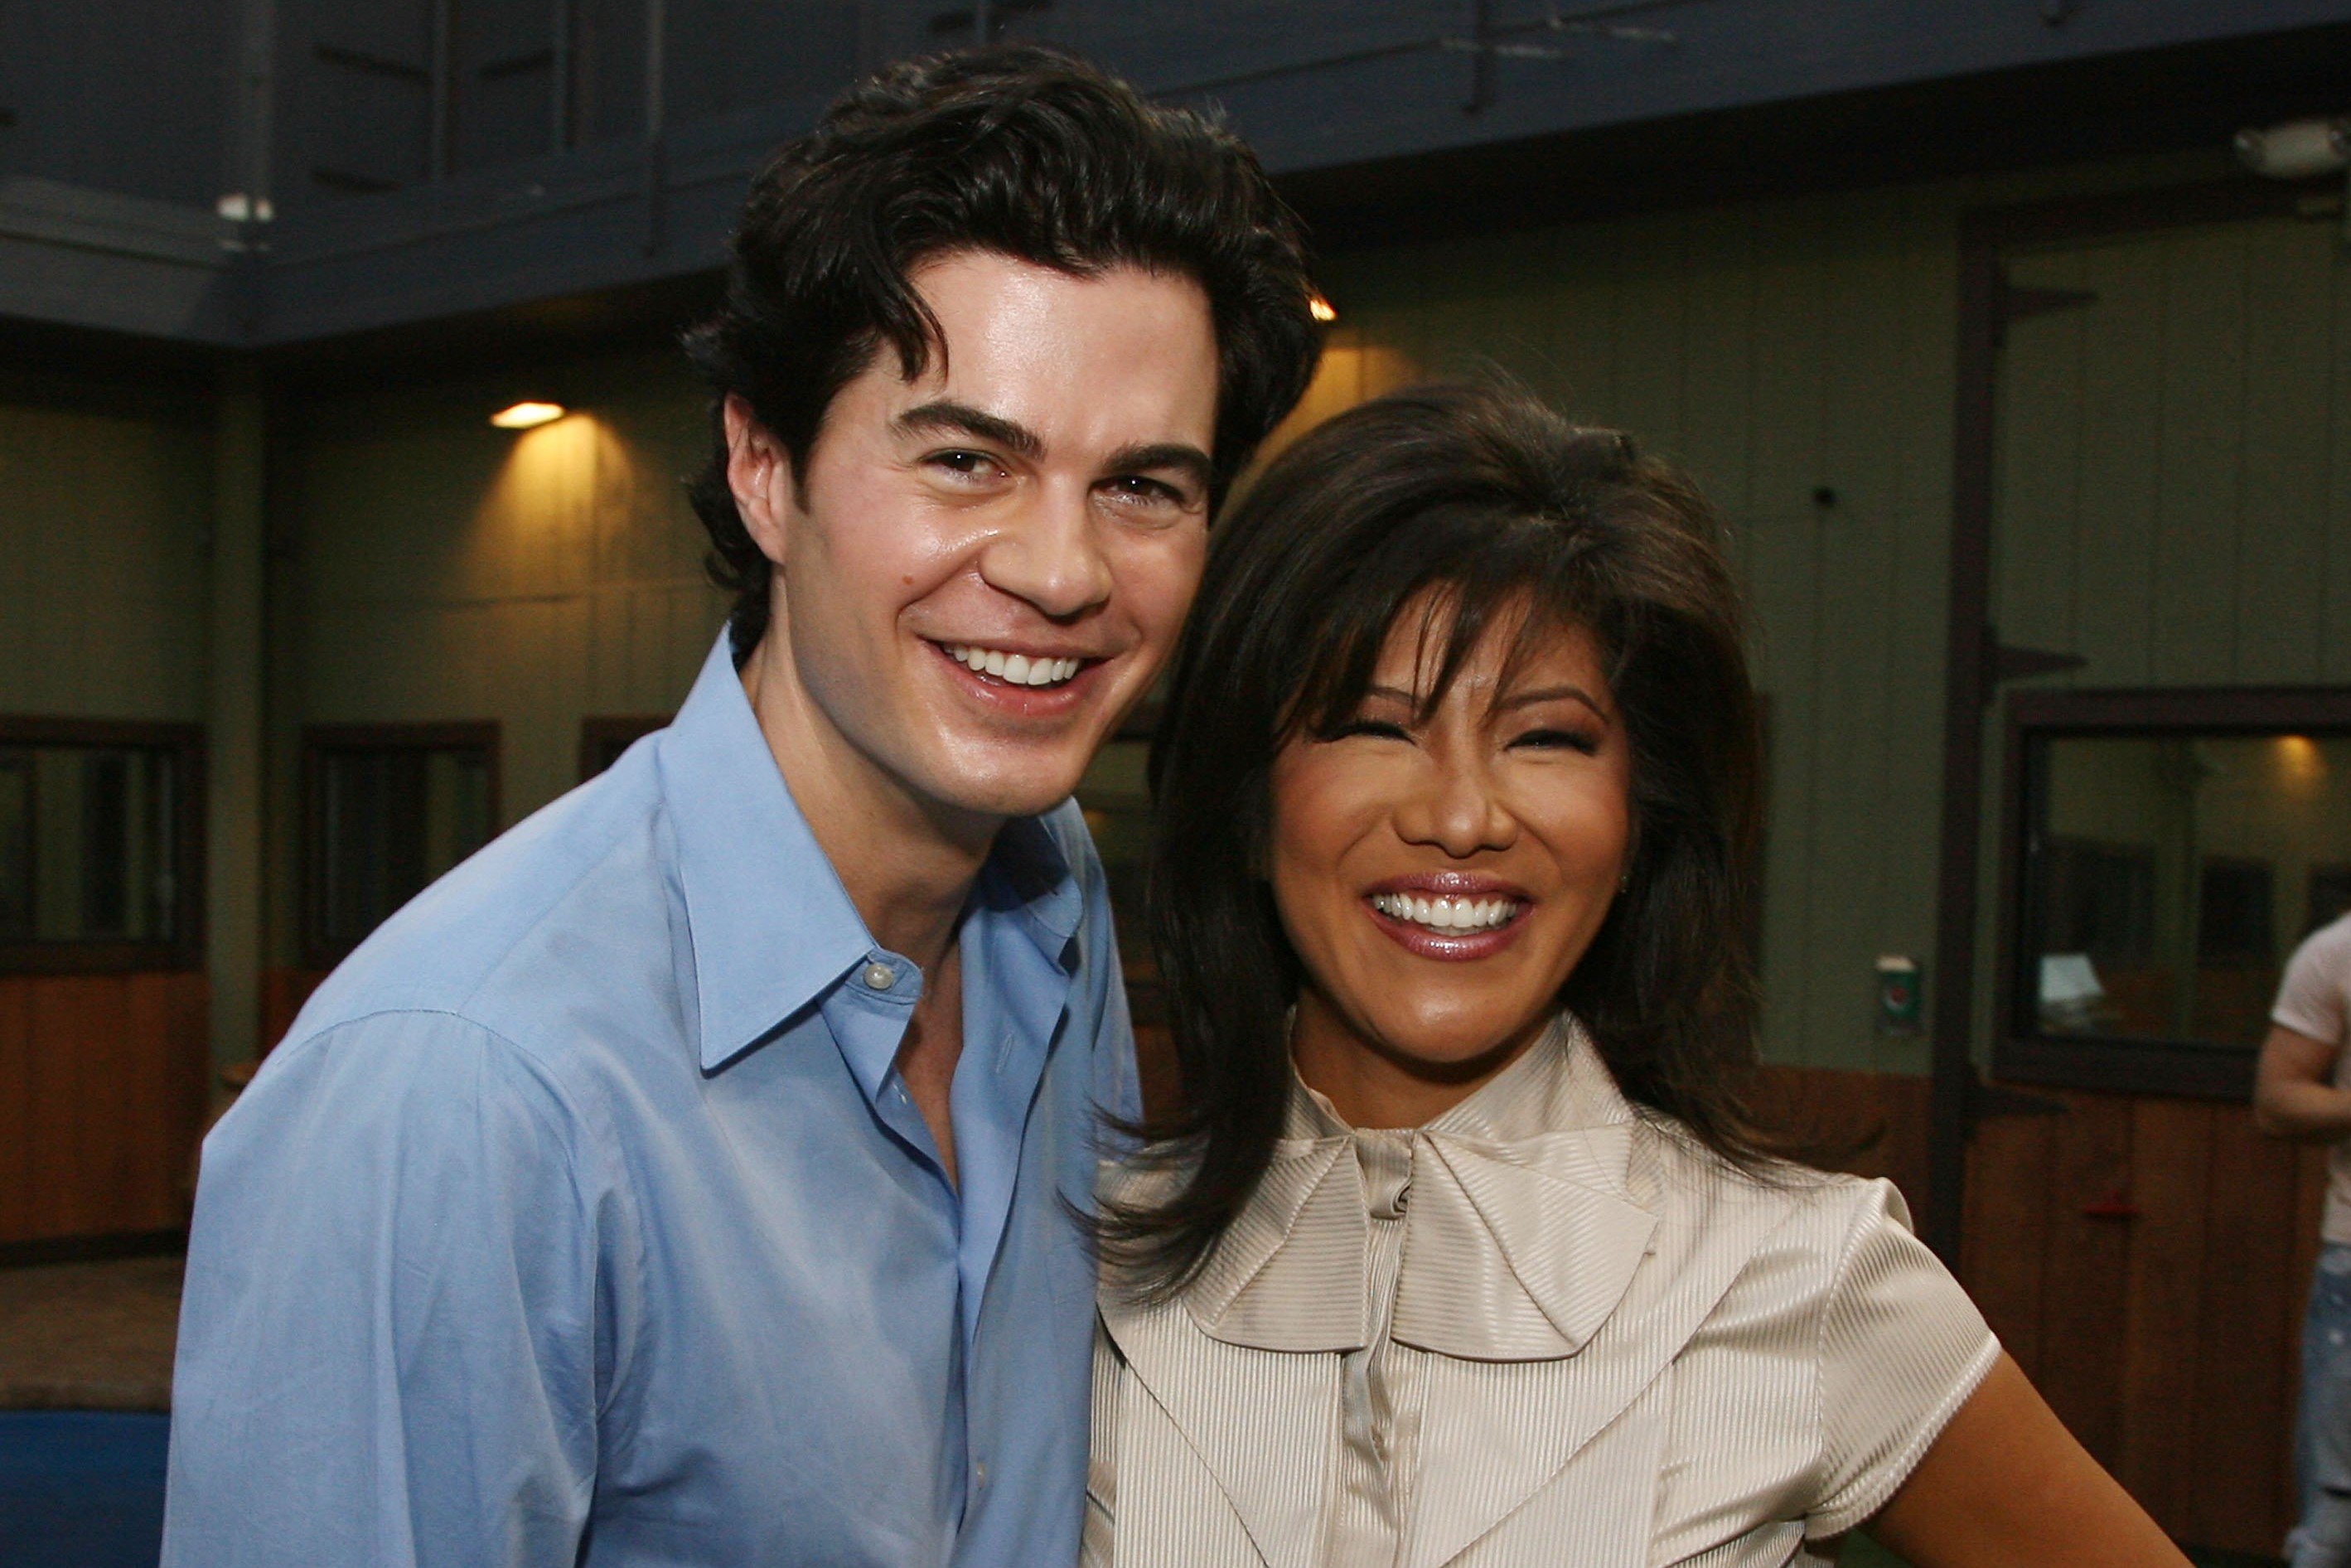 Will Kirby, the winner of 'Big Brother 2,' and Julie Chen Moonves, the host of 'Big Brother' on CBS, pose for pictures at the 'Big Brother 7' finale. Will wears a light blue button-up shirt. Julie wears a white blouse.